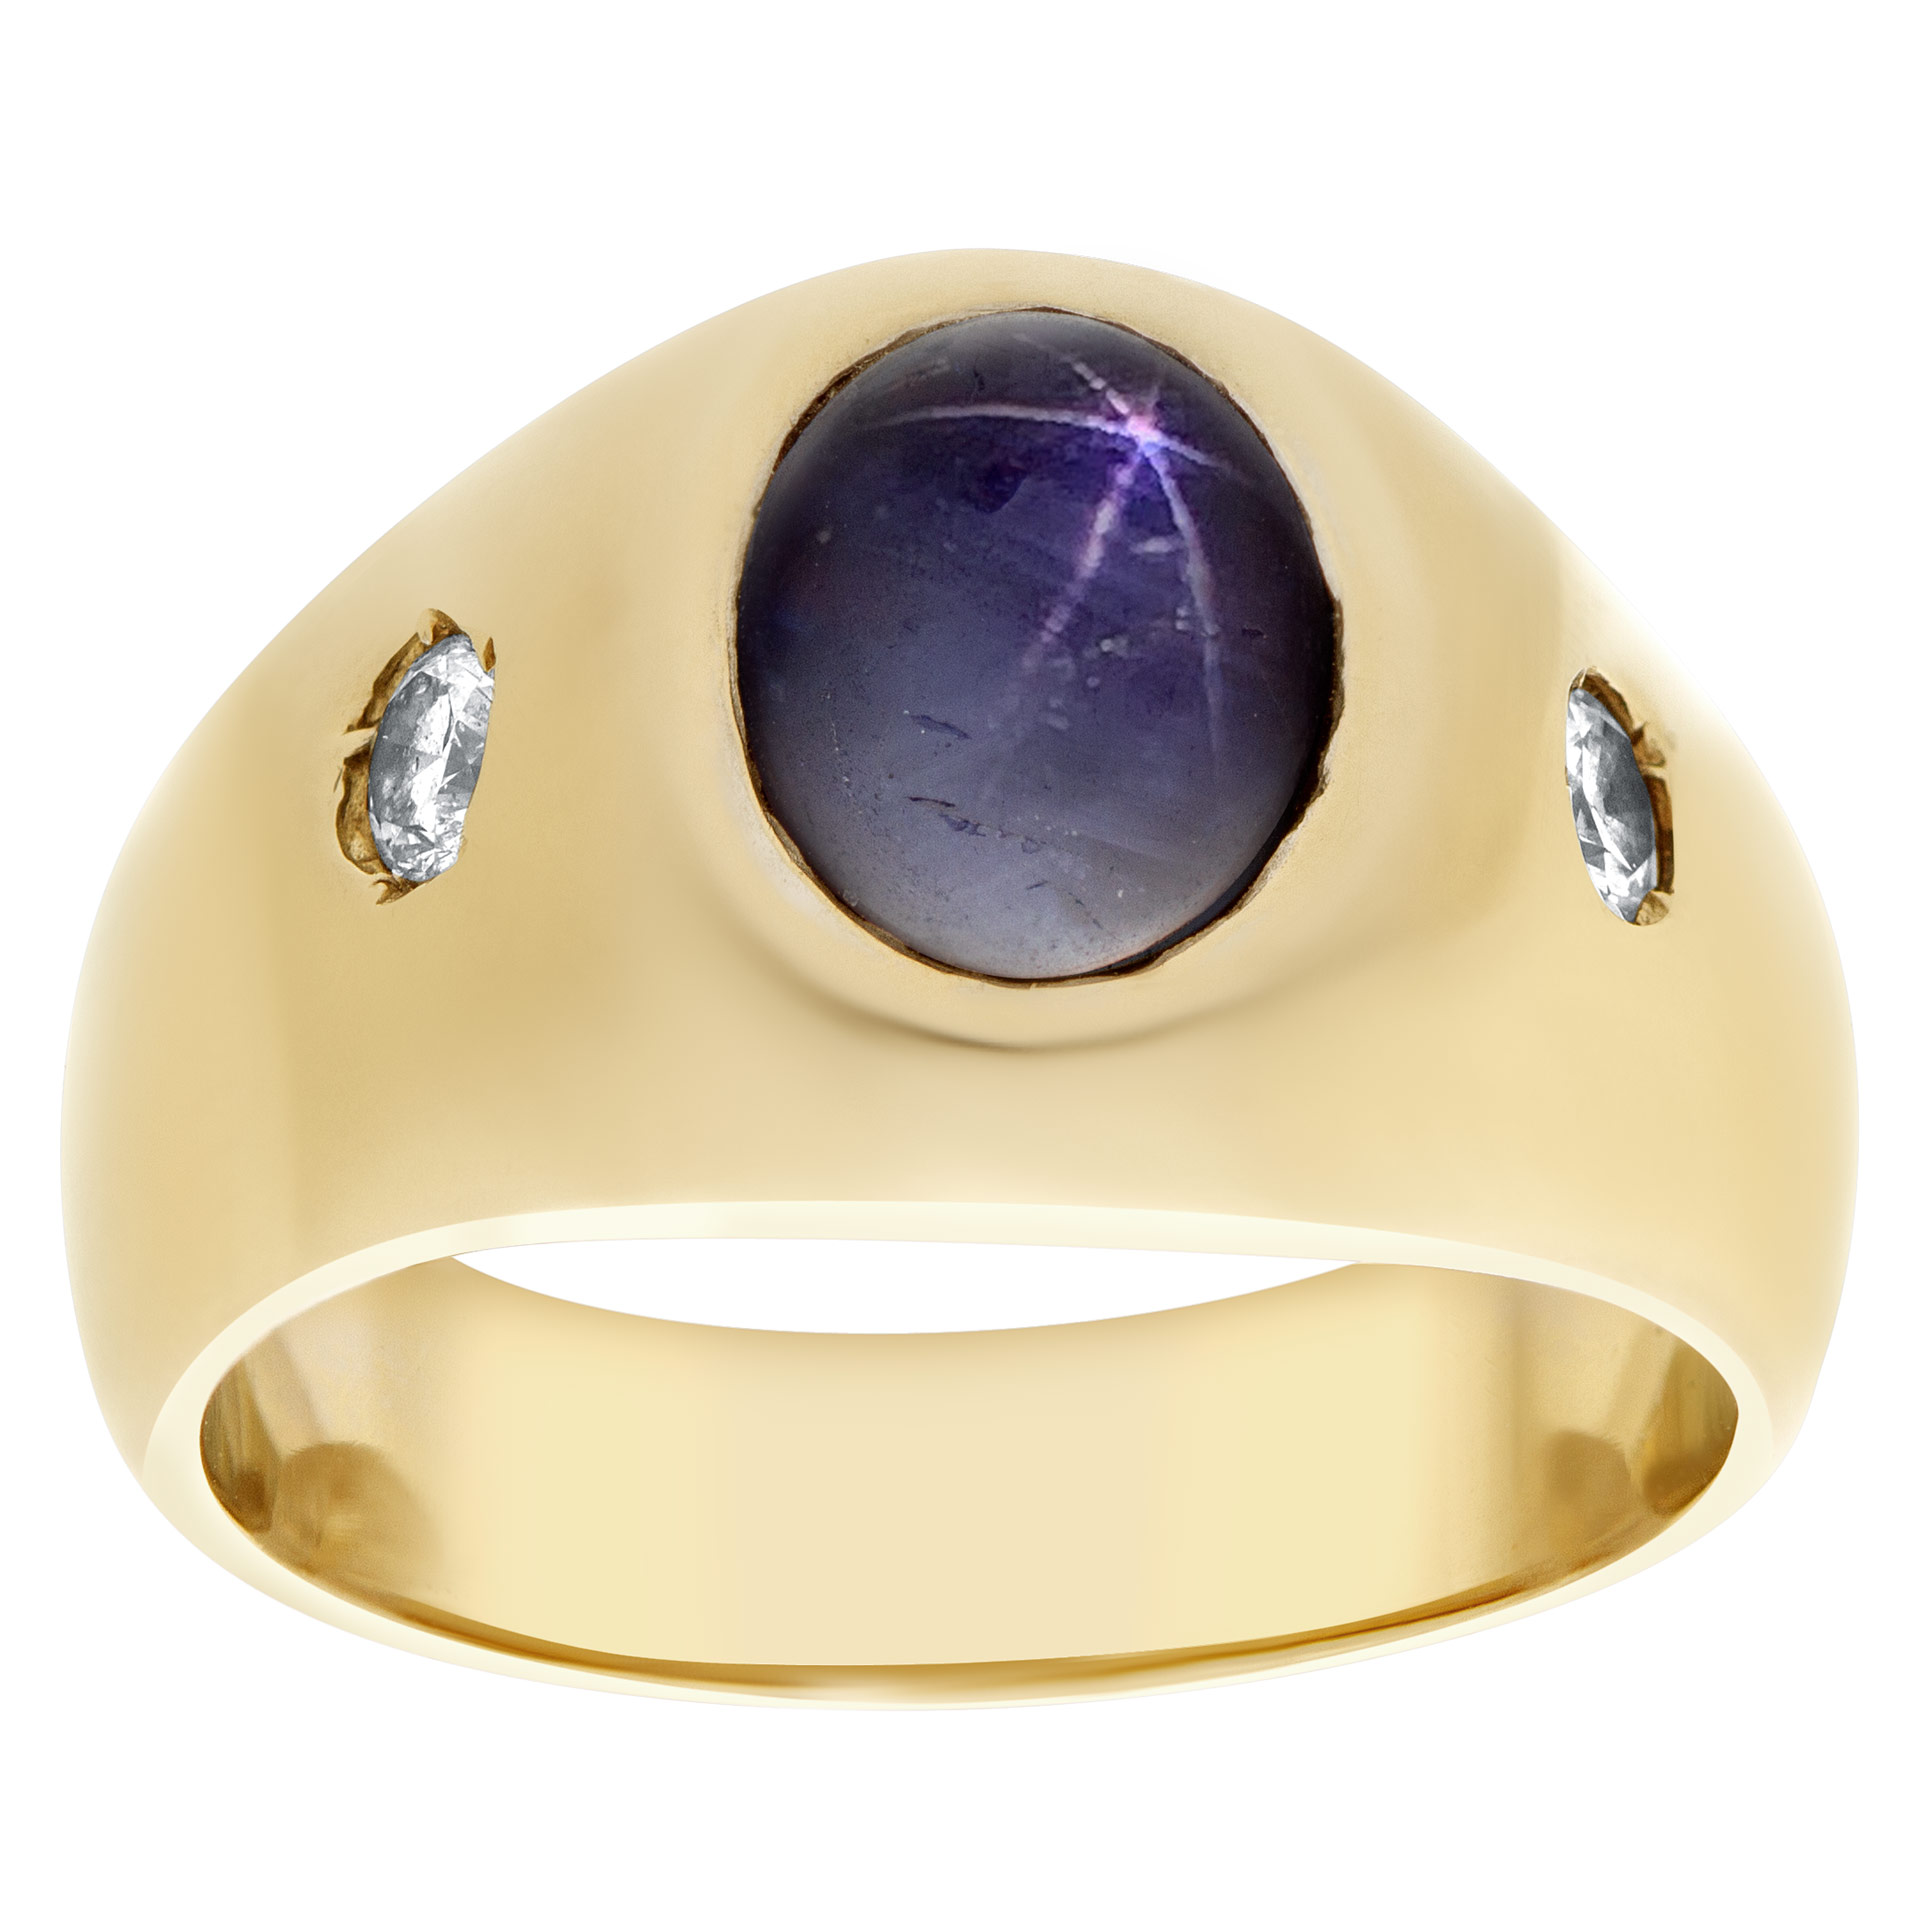 Star sapphire ring in 18k with two side diamond accents image 1